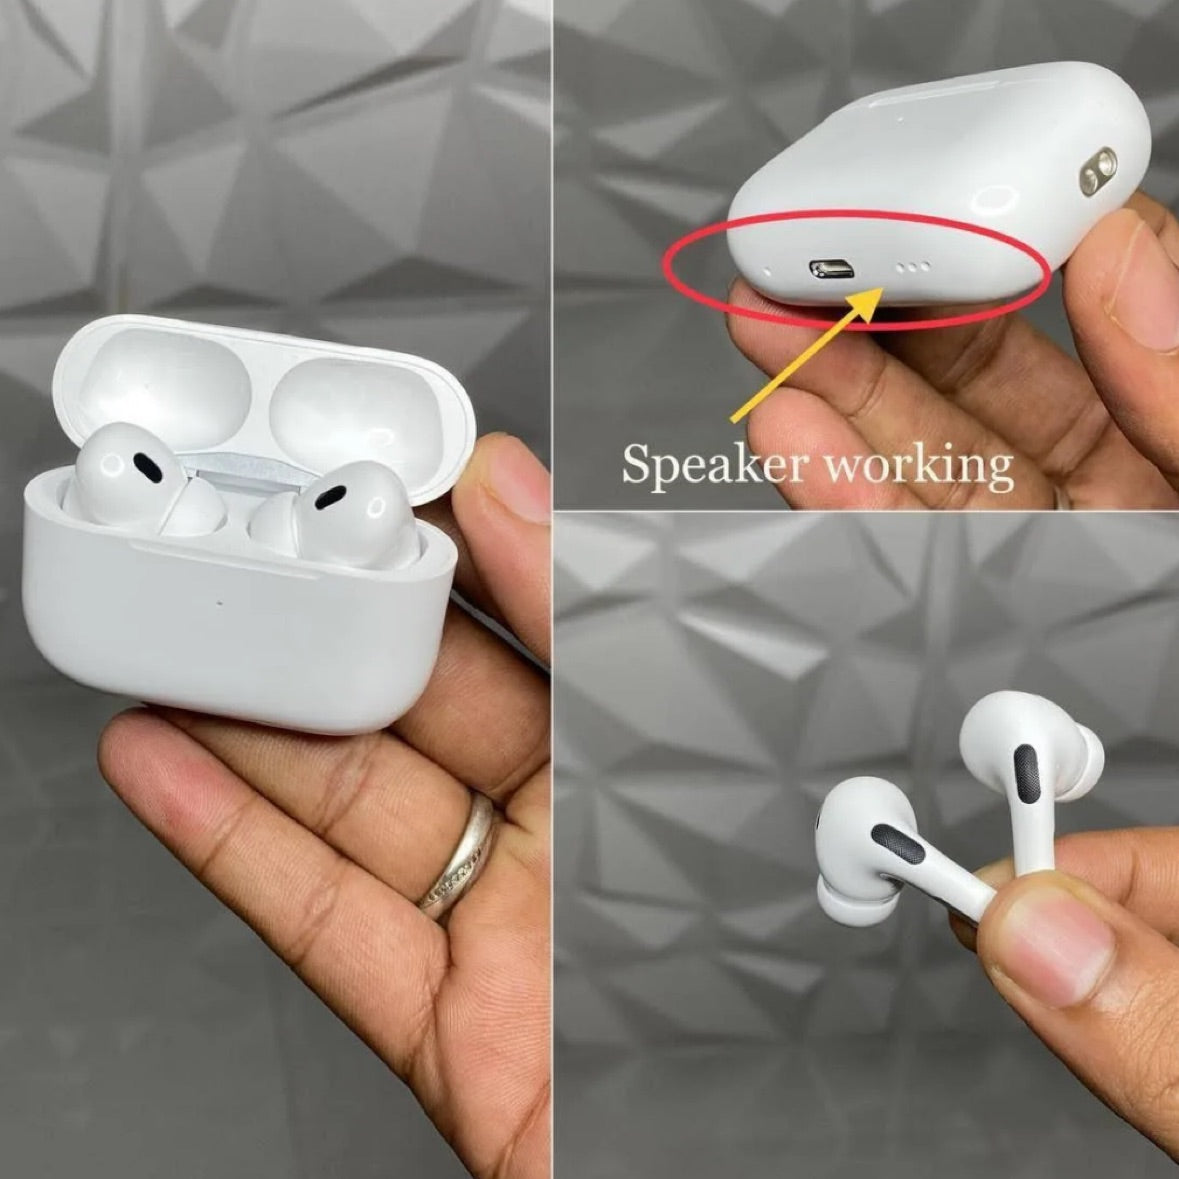 AirPods Pro 2 vs AirPods 3: which are better?